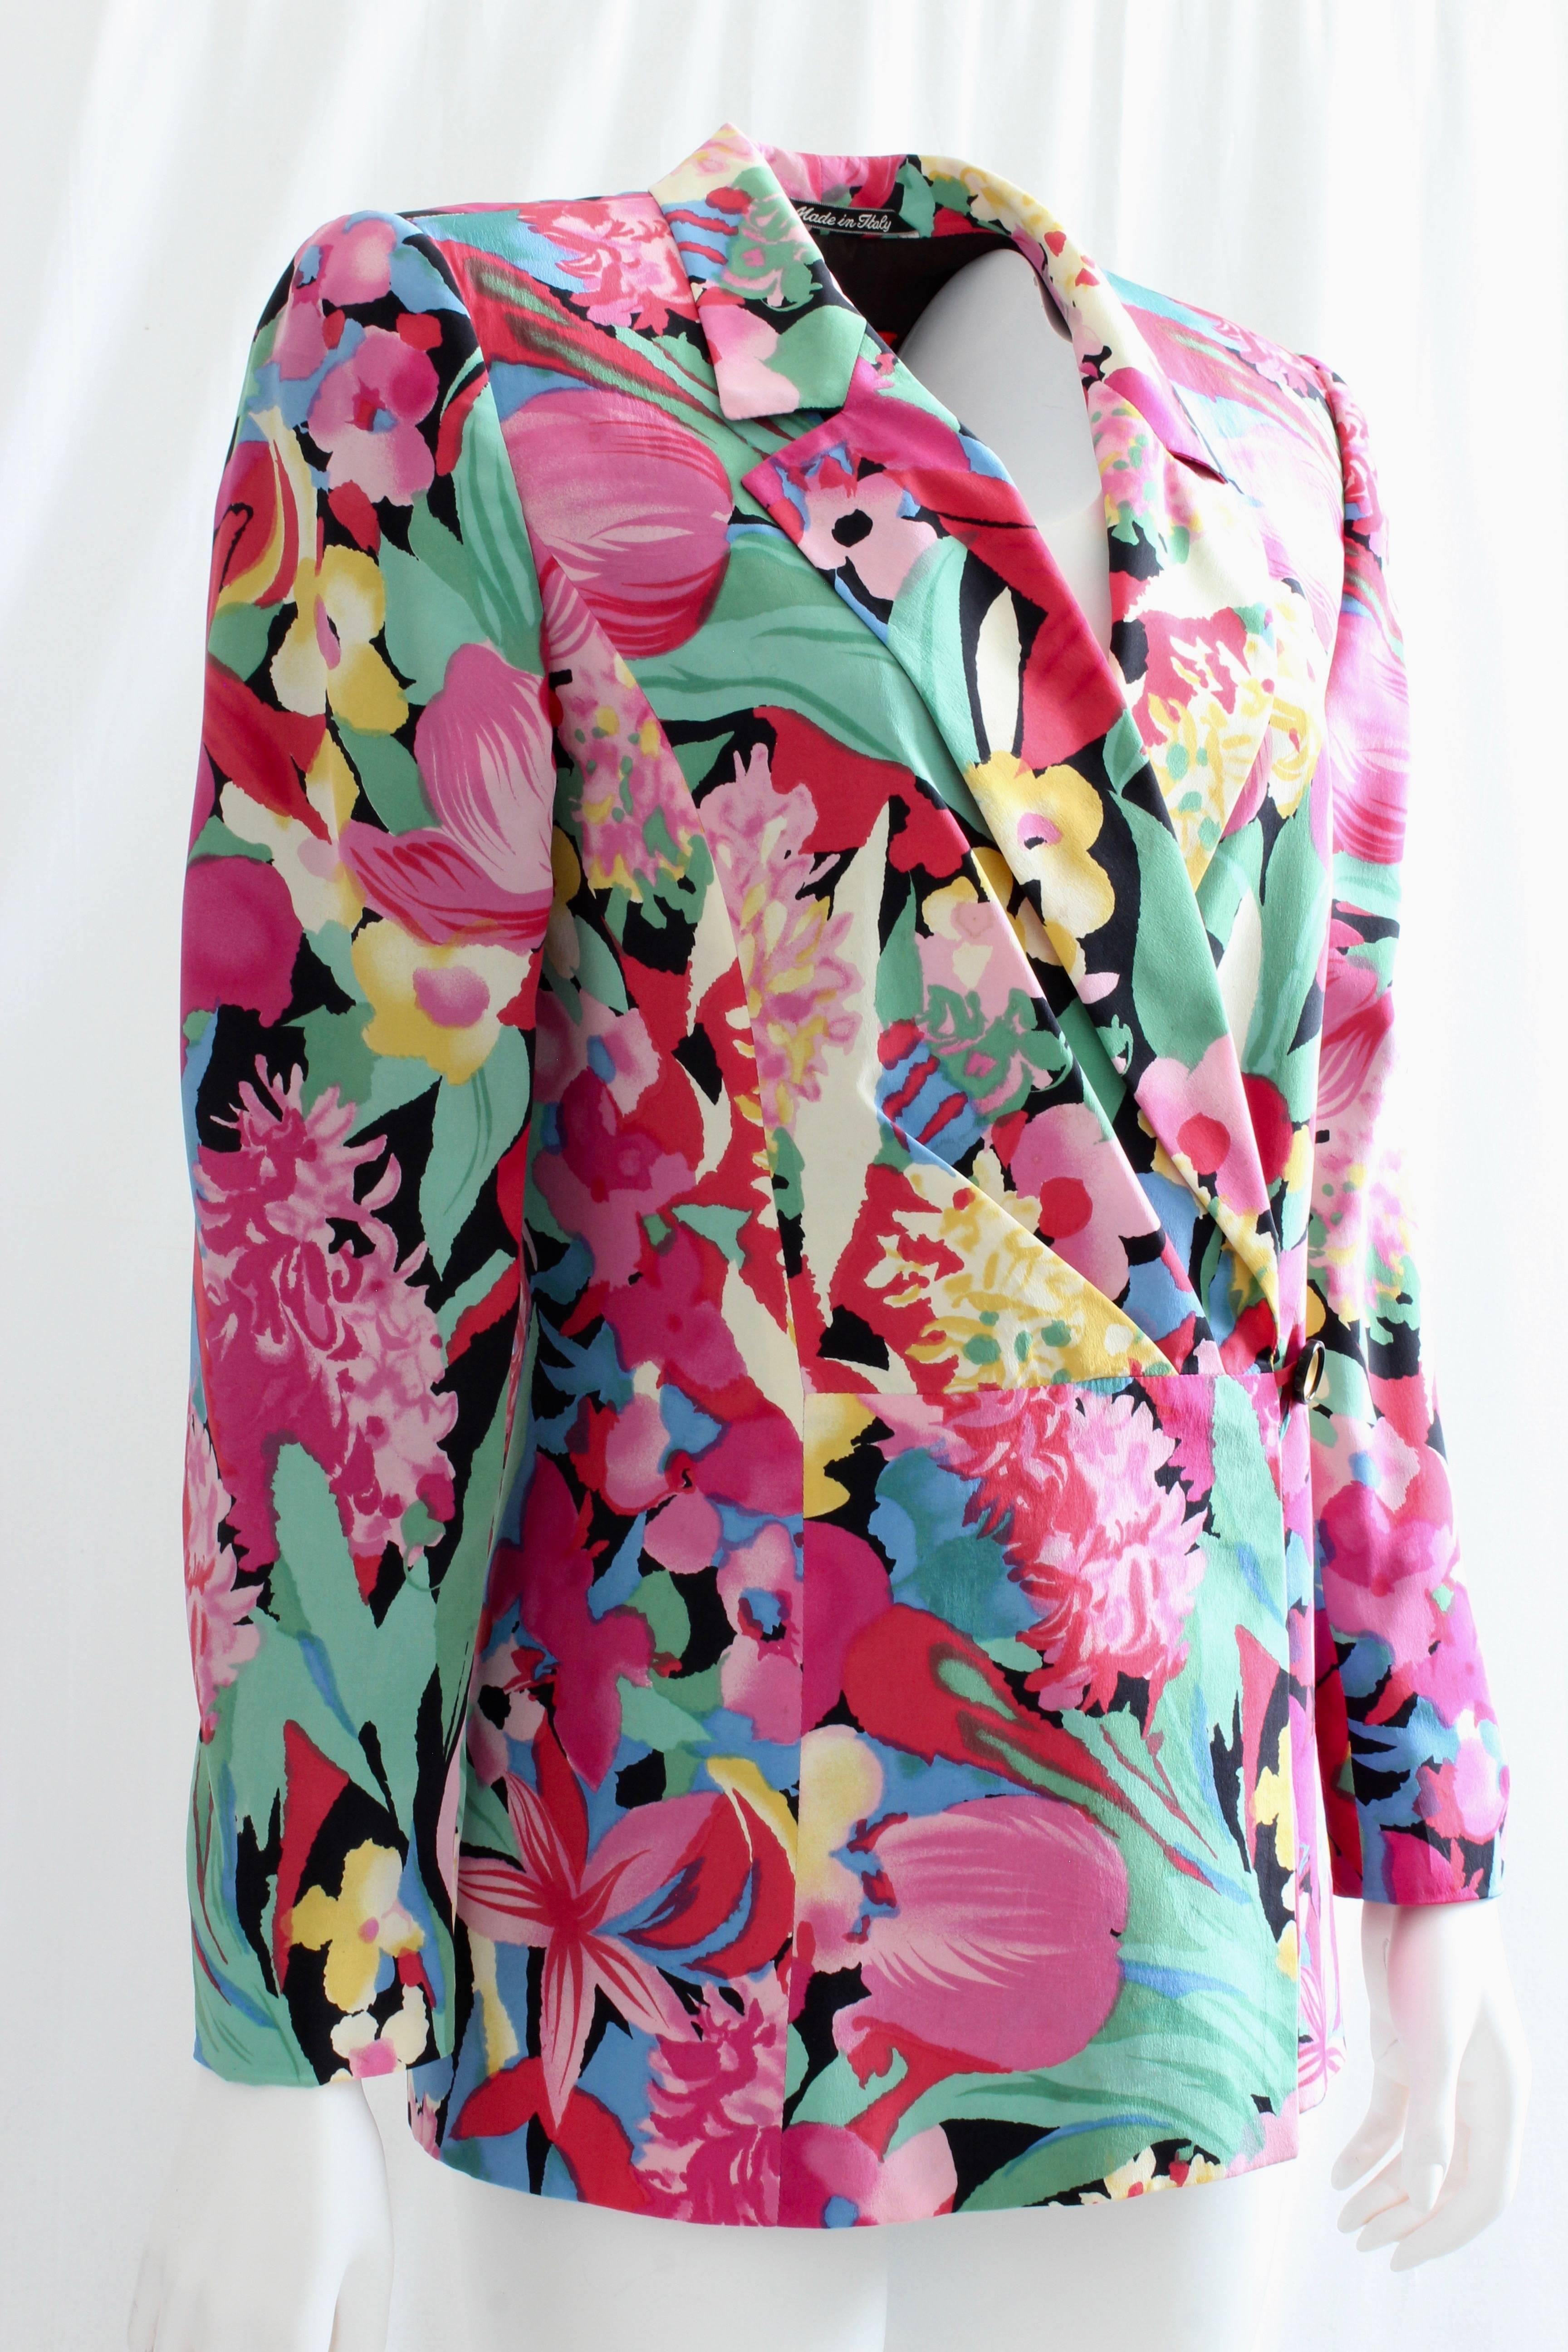 This colorful silk jacket was made by Ungaro for their Solo Donna collection, most likely in the 1990s.  Made from a gorgeous abstract floral print, it's fully-lined and features a pleated front panel.  In very good condition for its age, we note